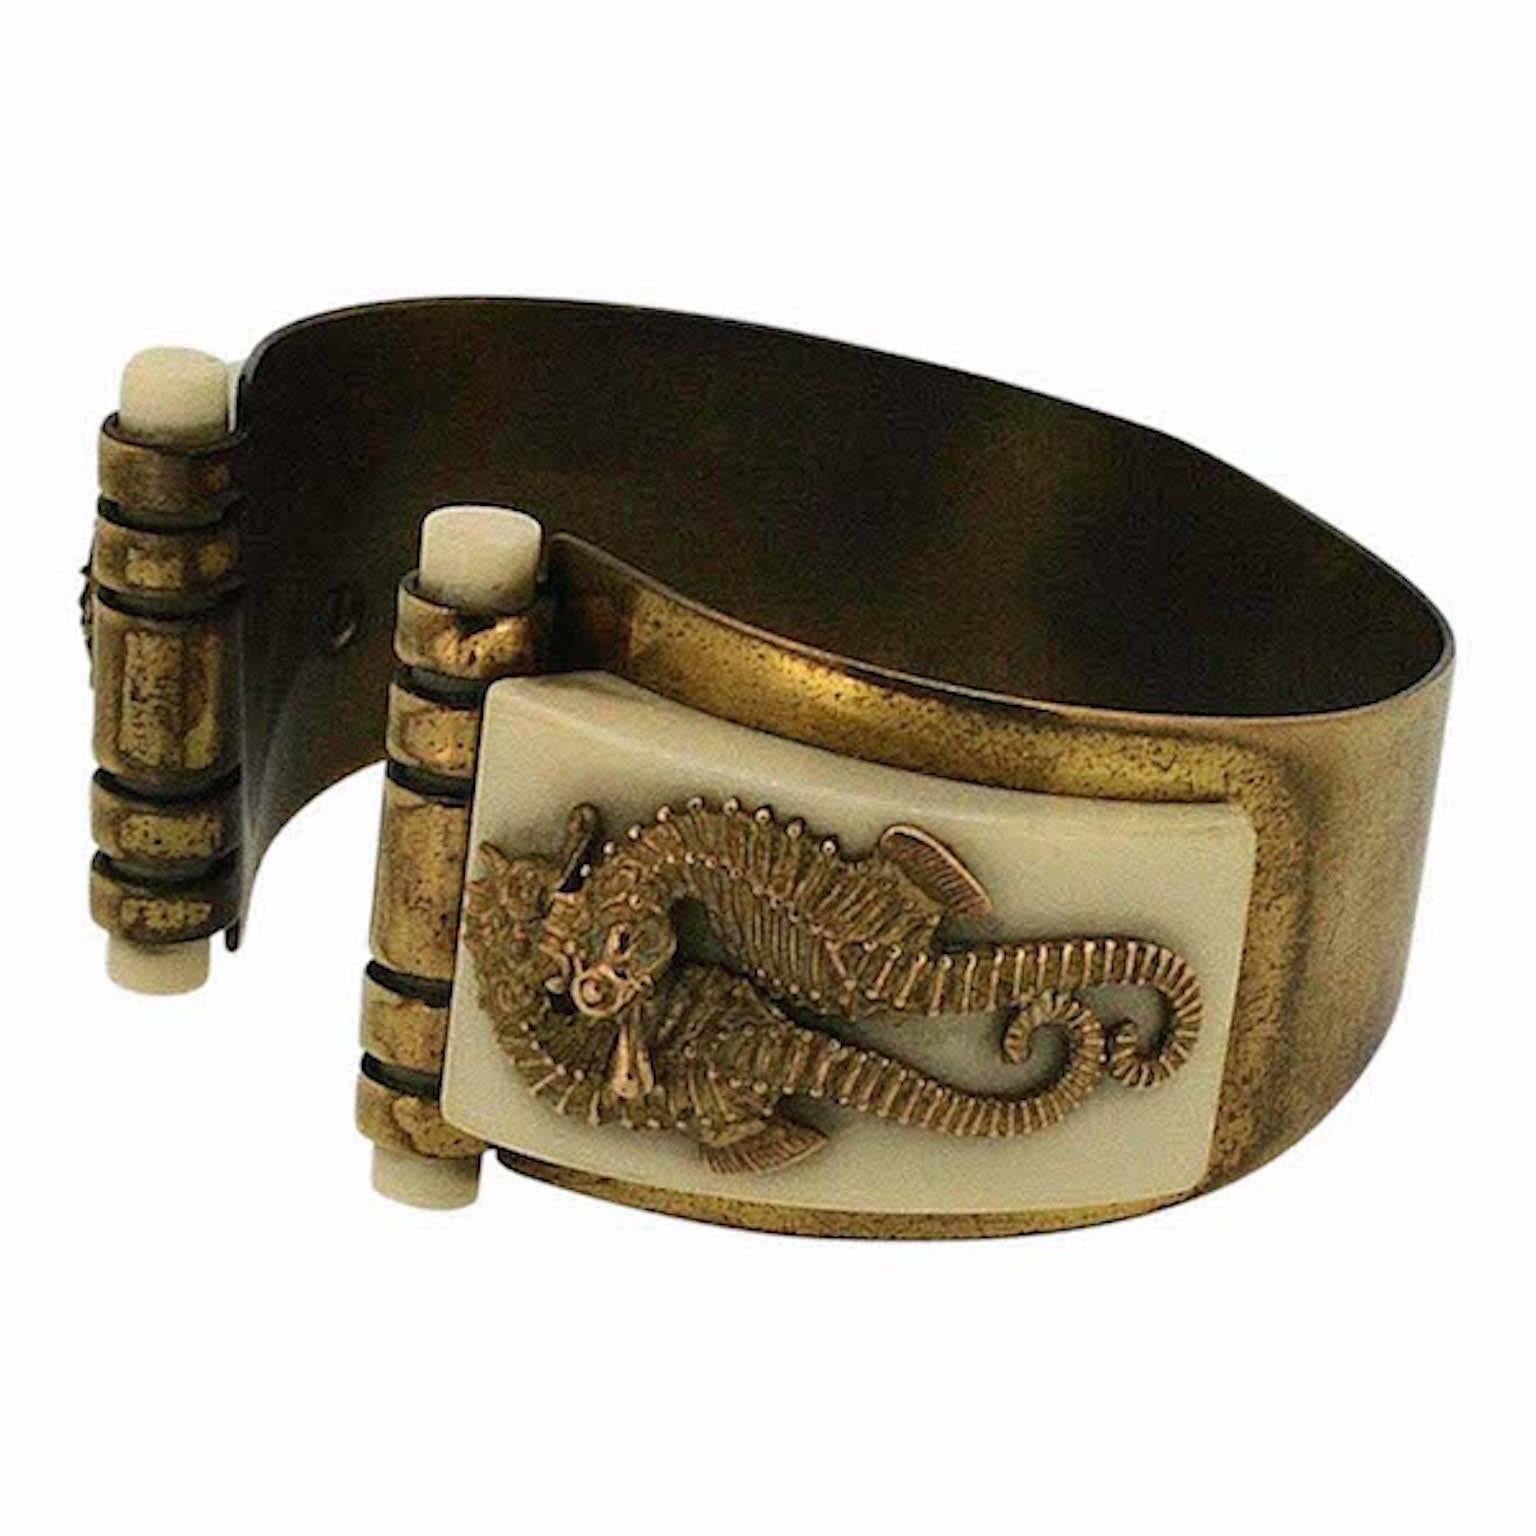 Featuring an unusual and evocative design, this bangle dates from the 1930s and was created in France by Jean Painlevé.
Condition Report:
Very Good - Some wear to the gilt metal consistent with age and use. This is only visible upon close inspection